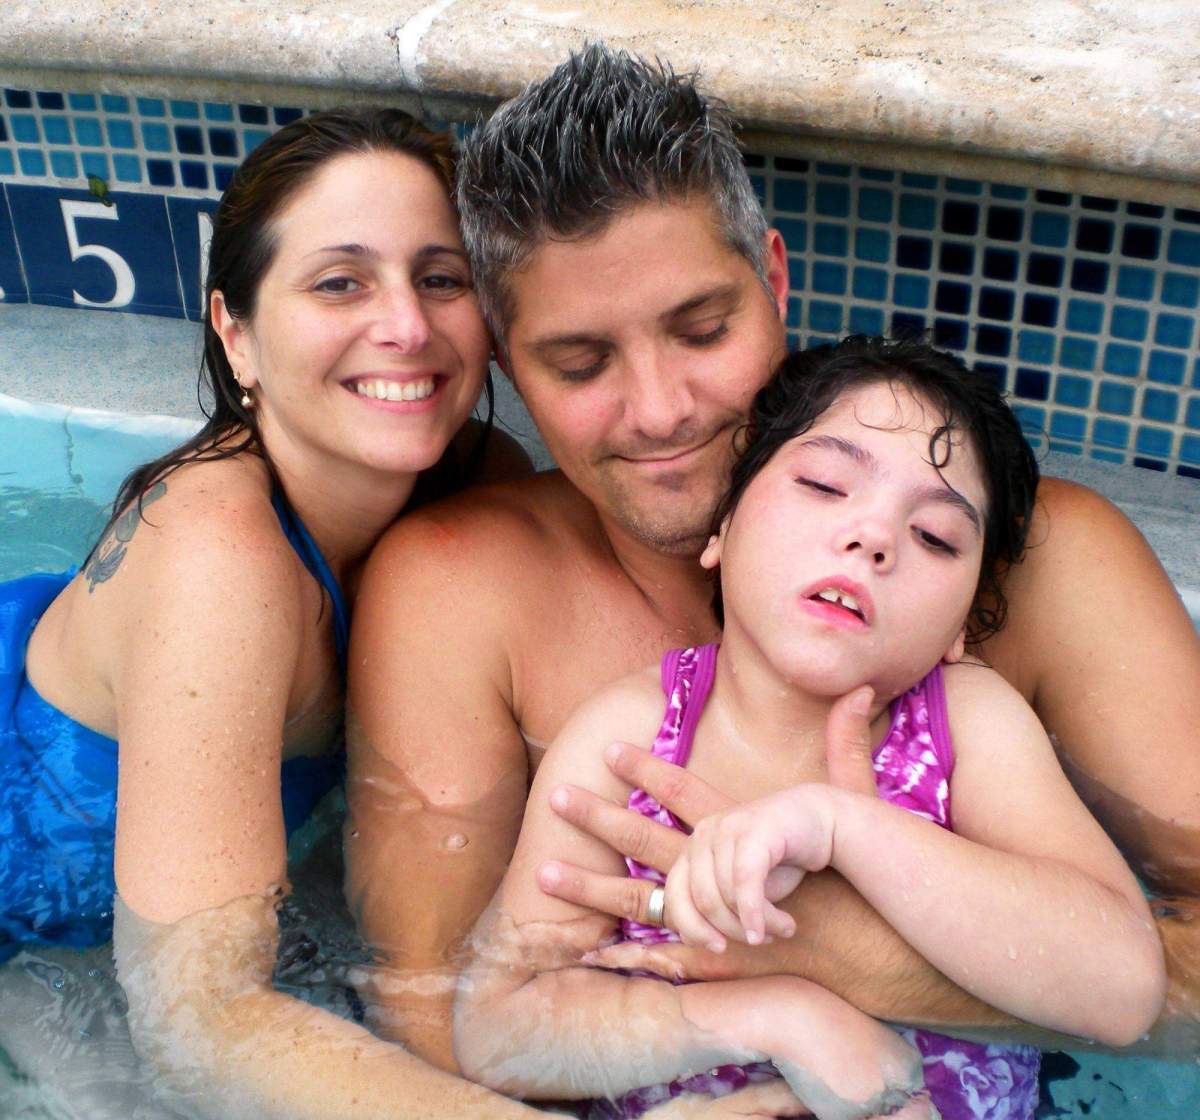 Couple seeks help from Queens for disabled daughter